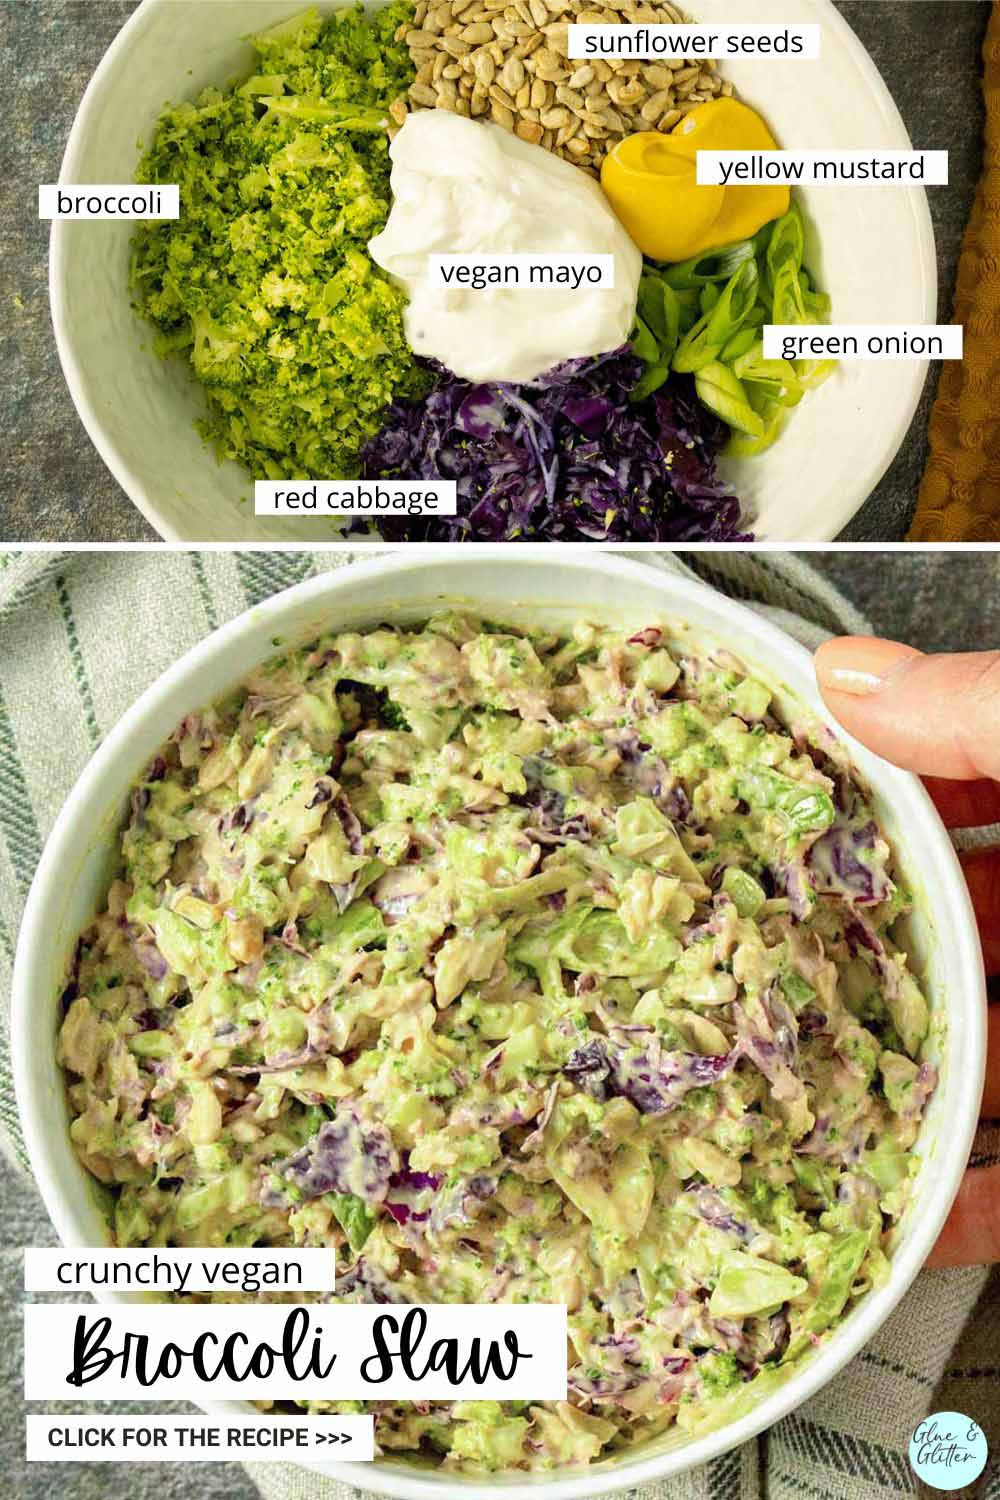 image collage showing broccoli slaw ingredients in the bowl before and after mixing, ingredients and recipe are labeled with text